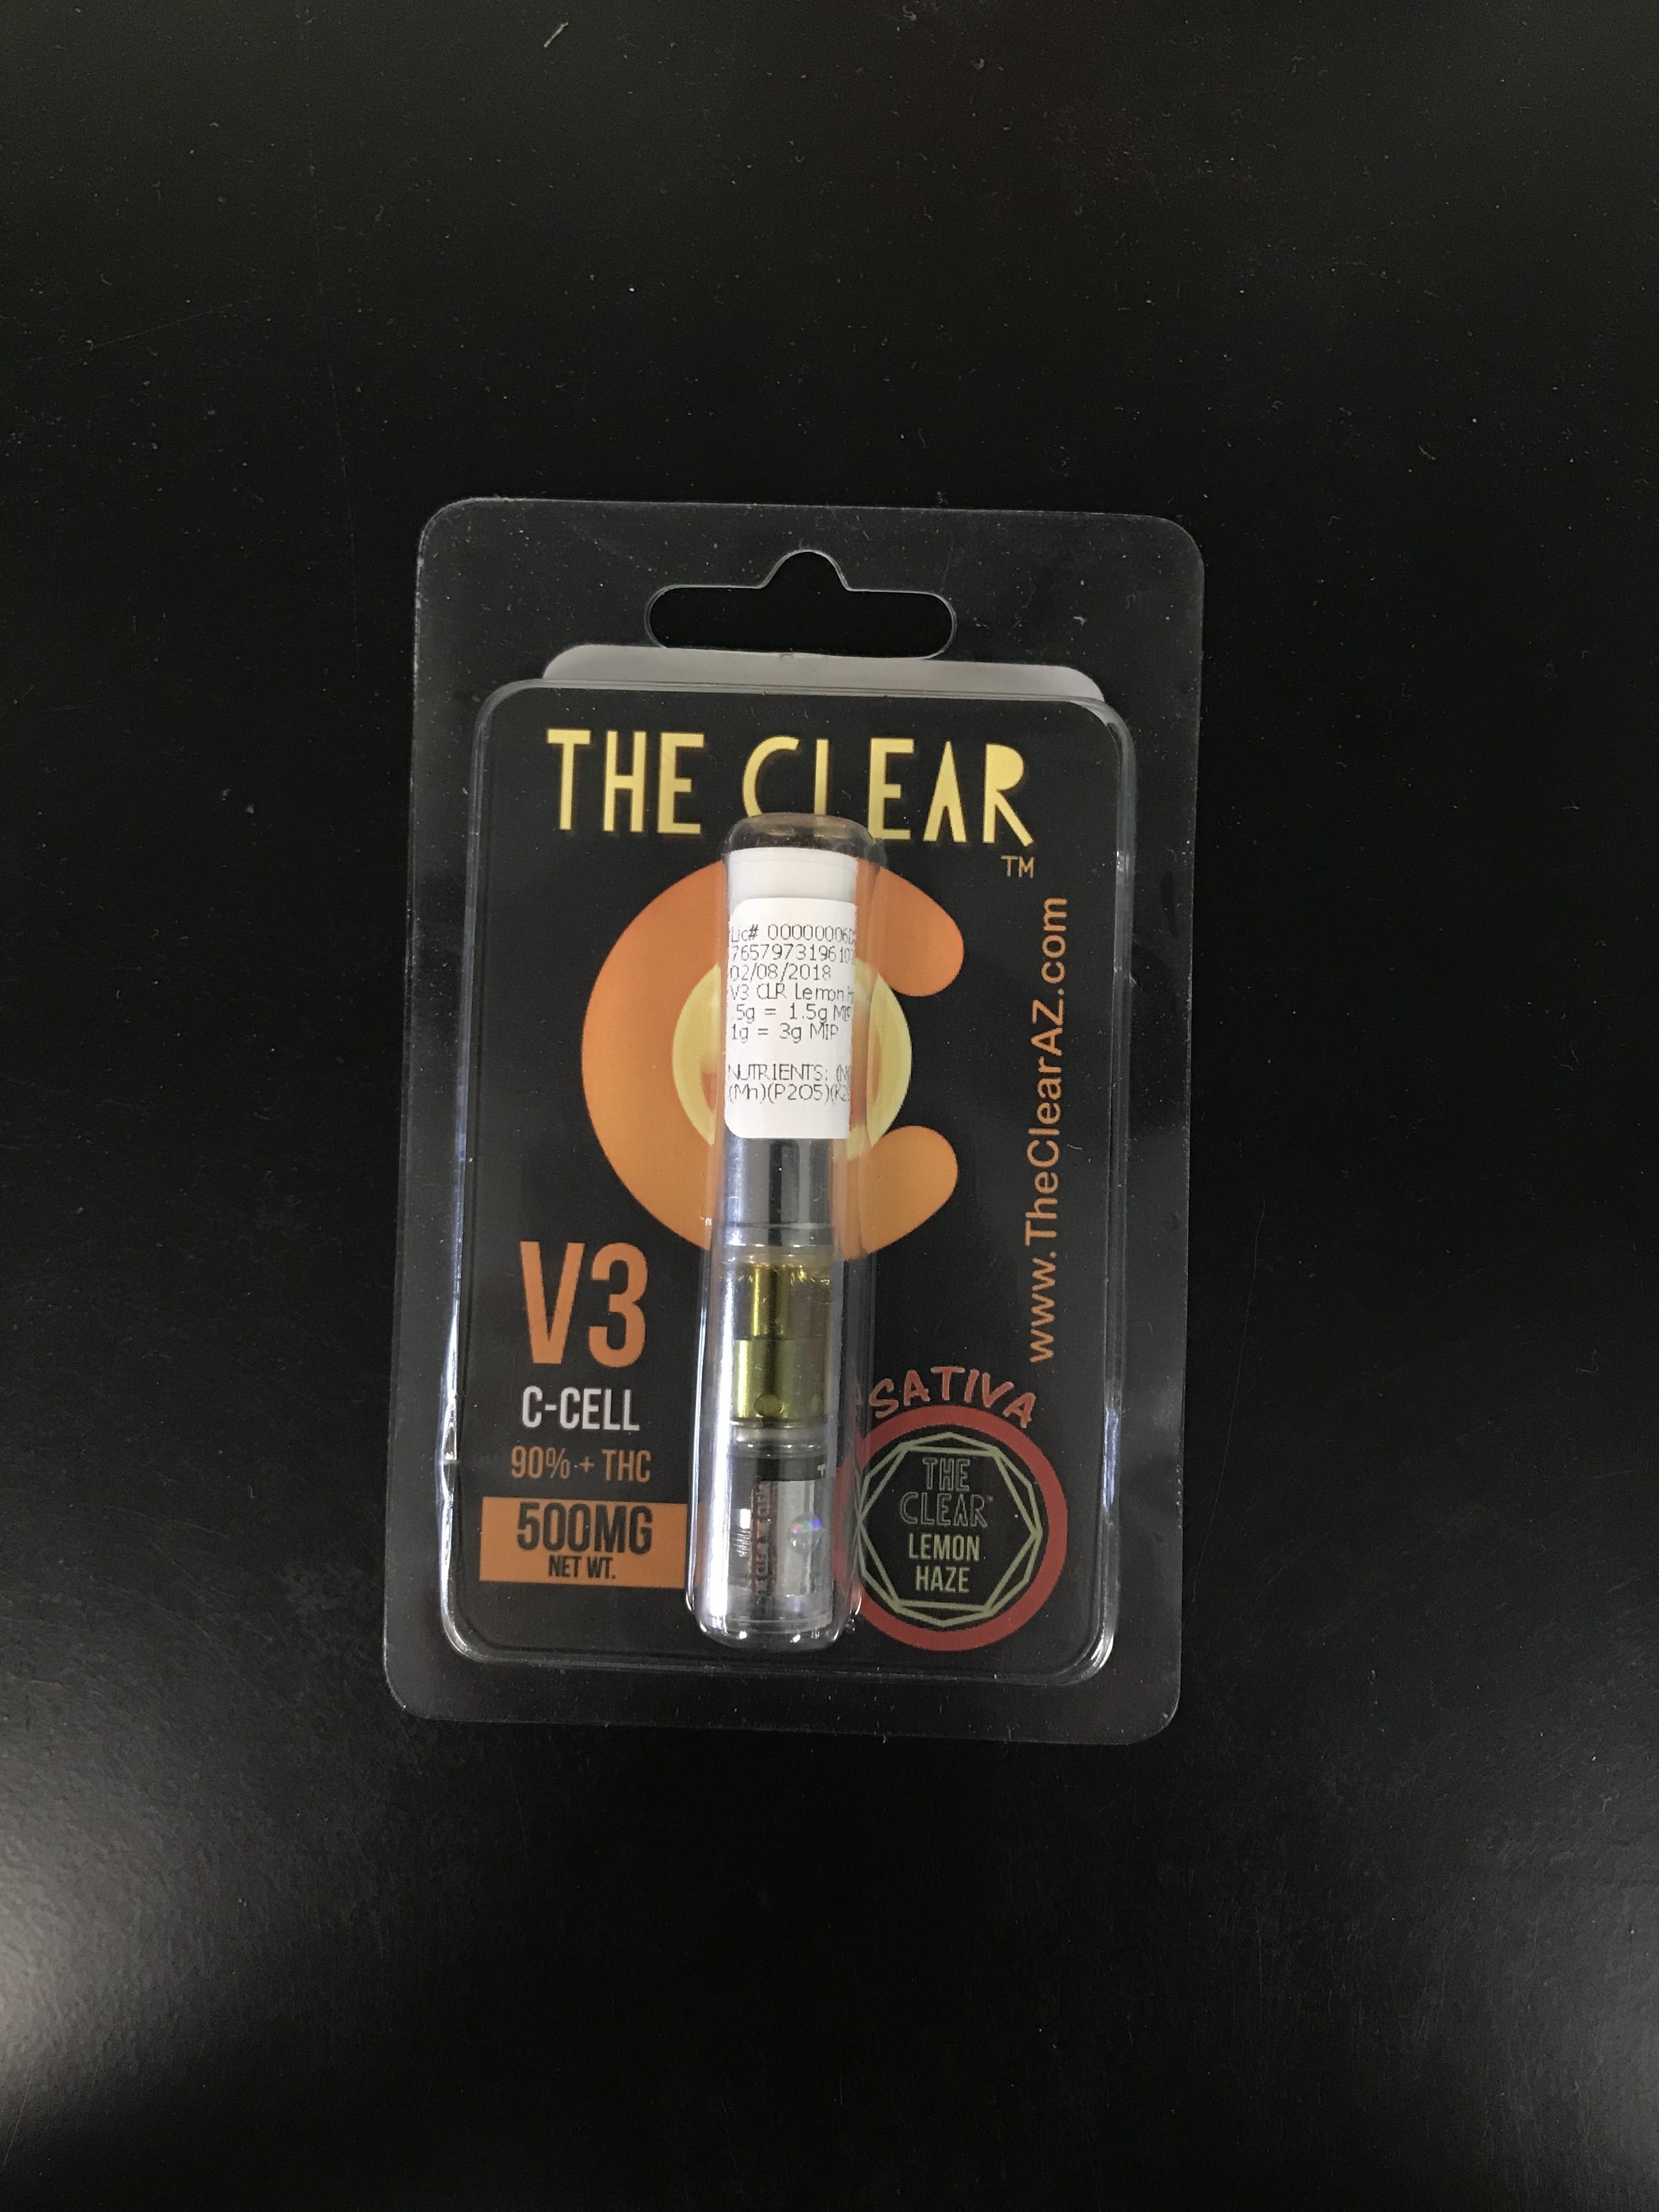 concentrate-the-clear-v3-lemon-haze-500mg-cartridge